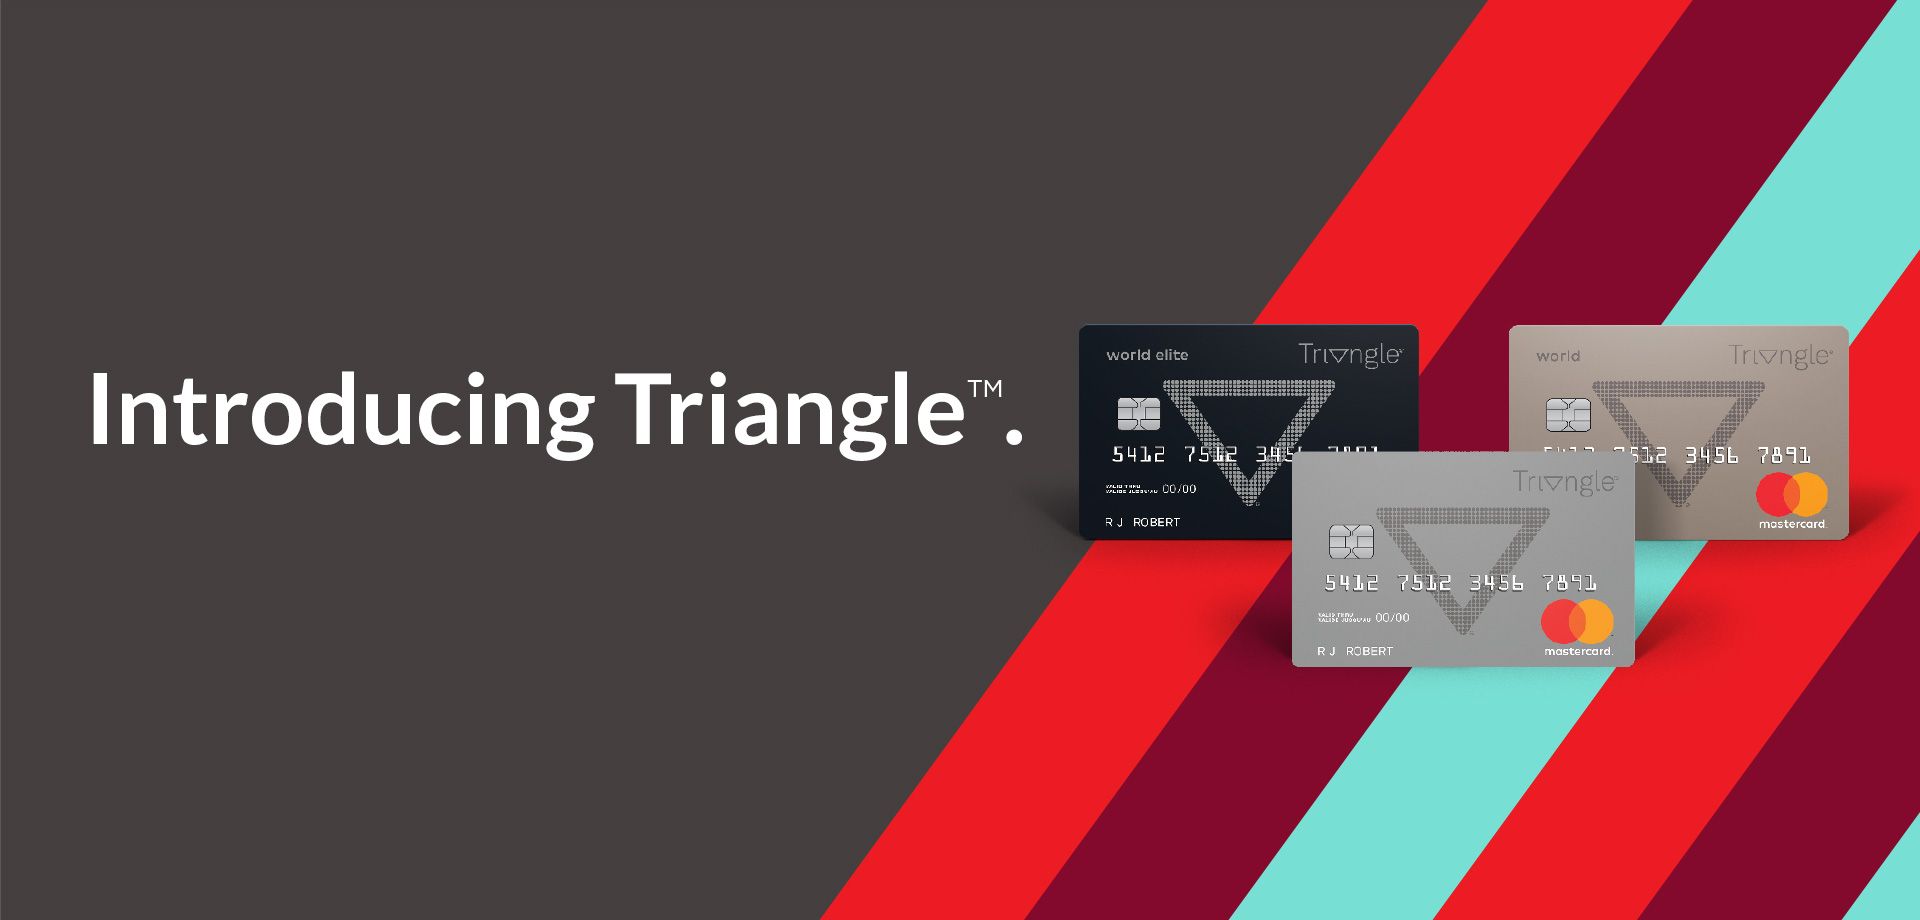 Find Out How to Apply for a Triangle Credit Card - Triangle MasterCard